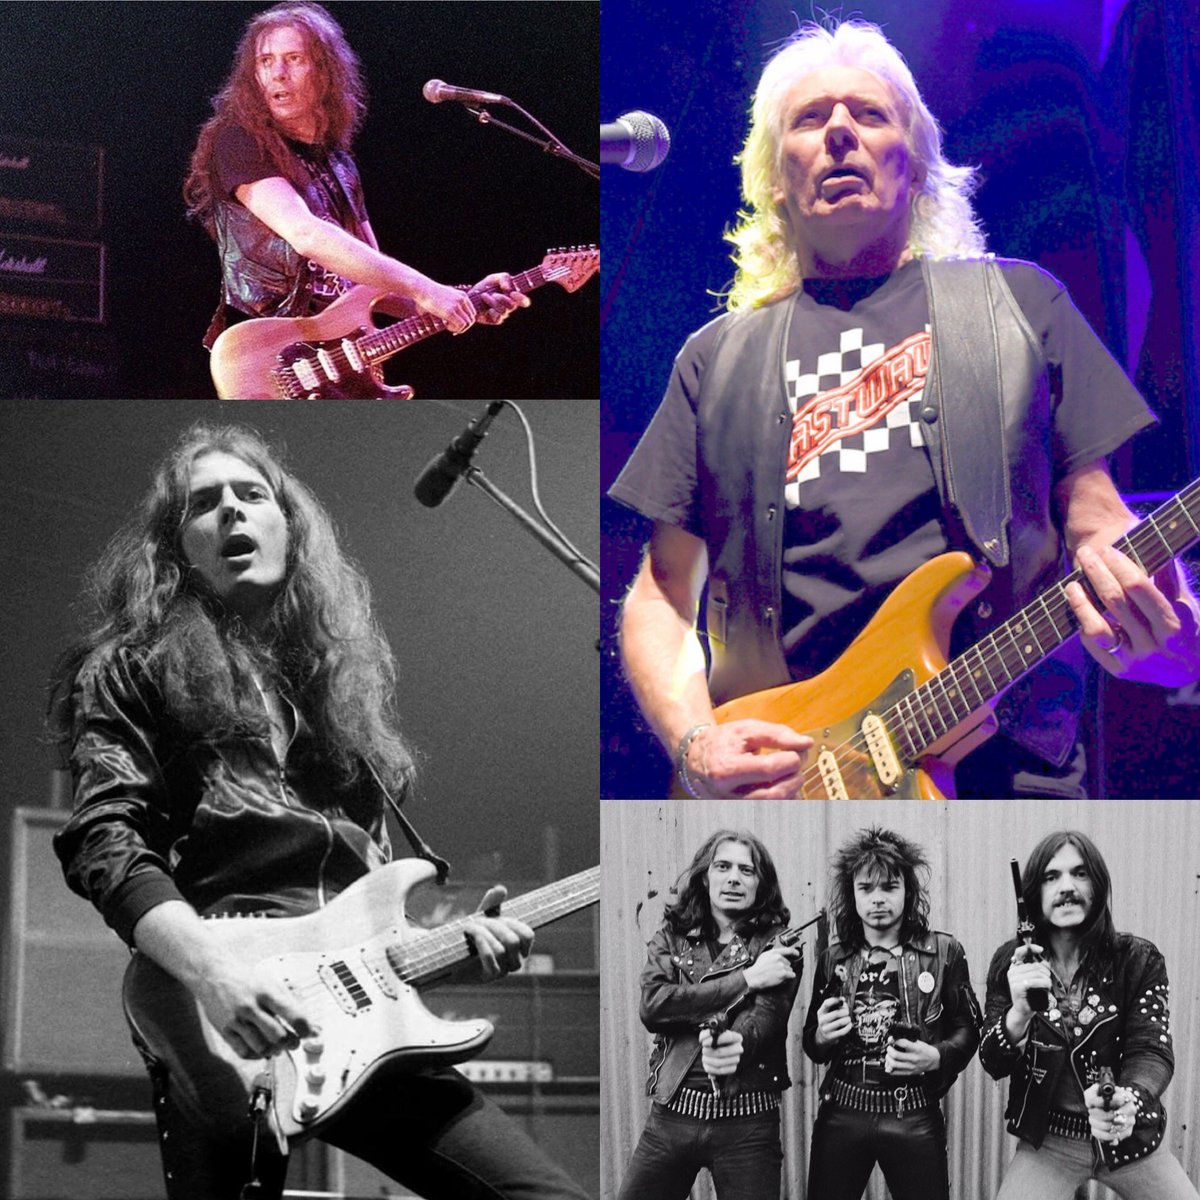 Remembering the legendary Motörhead and Fastway Guitarist,
Fast Eddie Clarke on what would have been his 70th Birthday,what a Guitarist,still one of my favourites \m/...😎♠️♠️♠️
#fasteddieclarke 
#Motörhead
#fastway
#HEAVYMETAL 
#metalattackers
#metaltourshirts